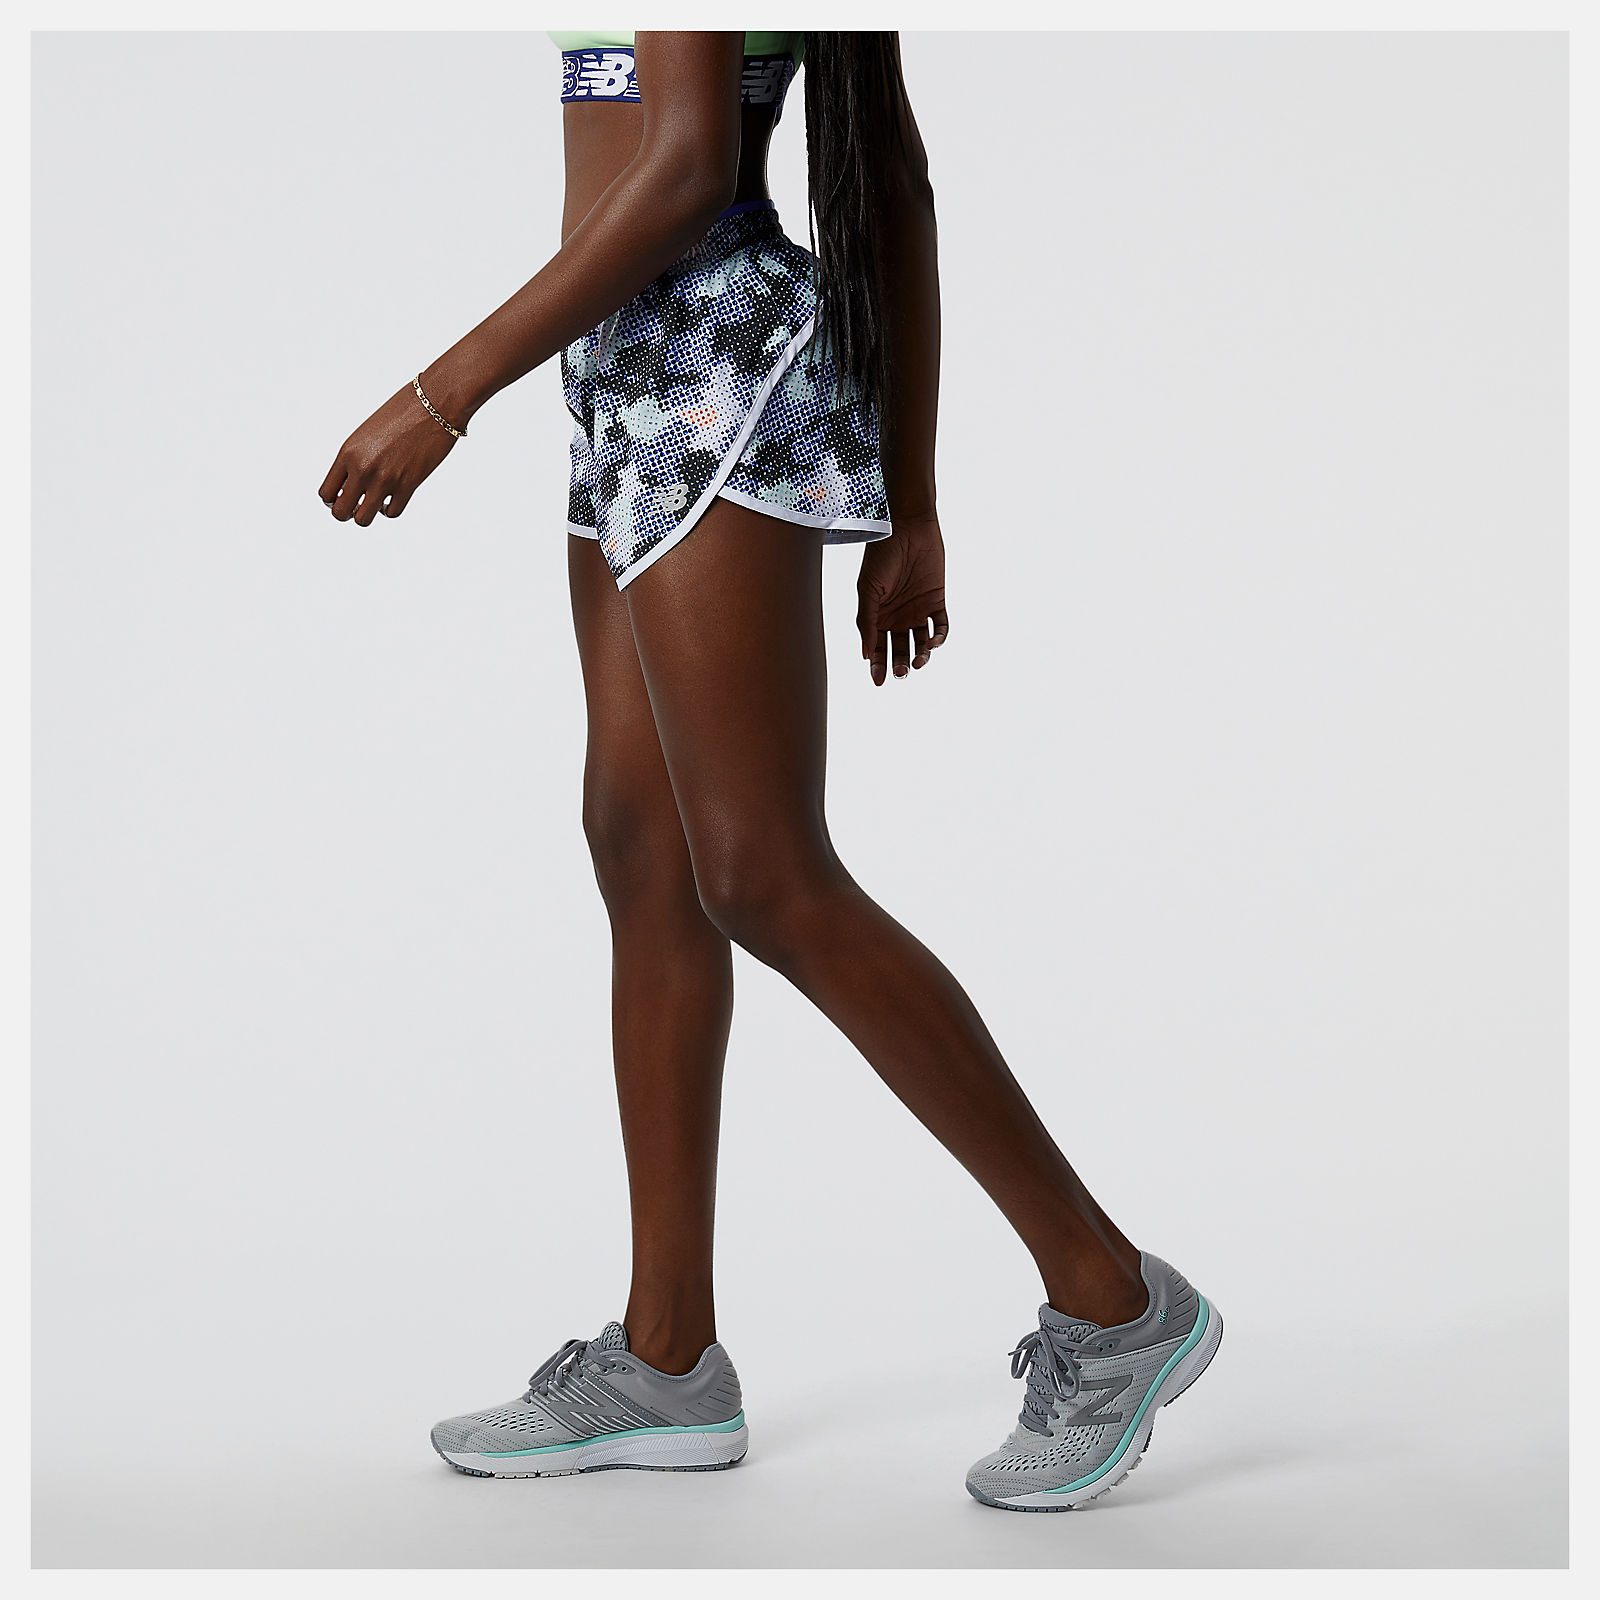 Printed Accelerate Short 2.5 inch - Joe's New Balance Outlet